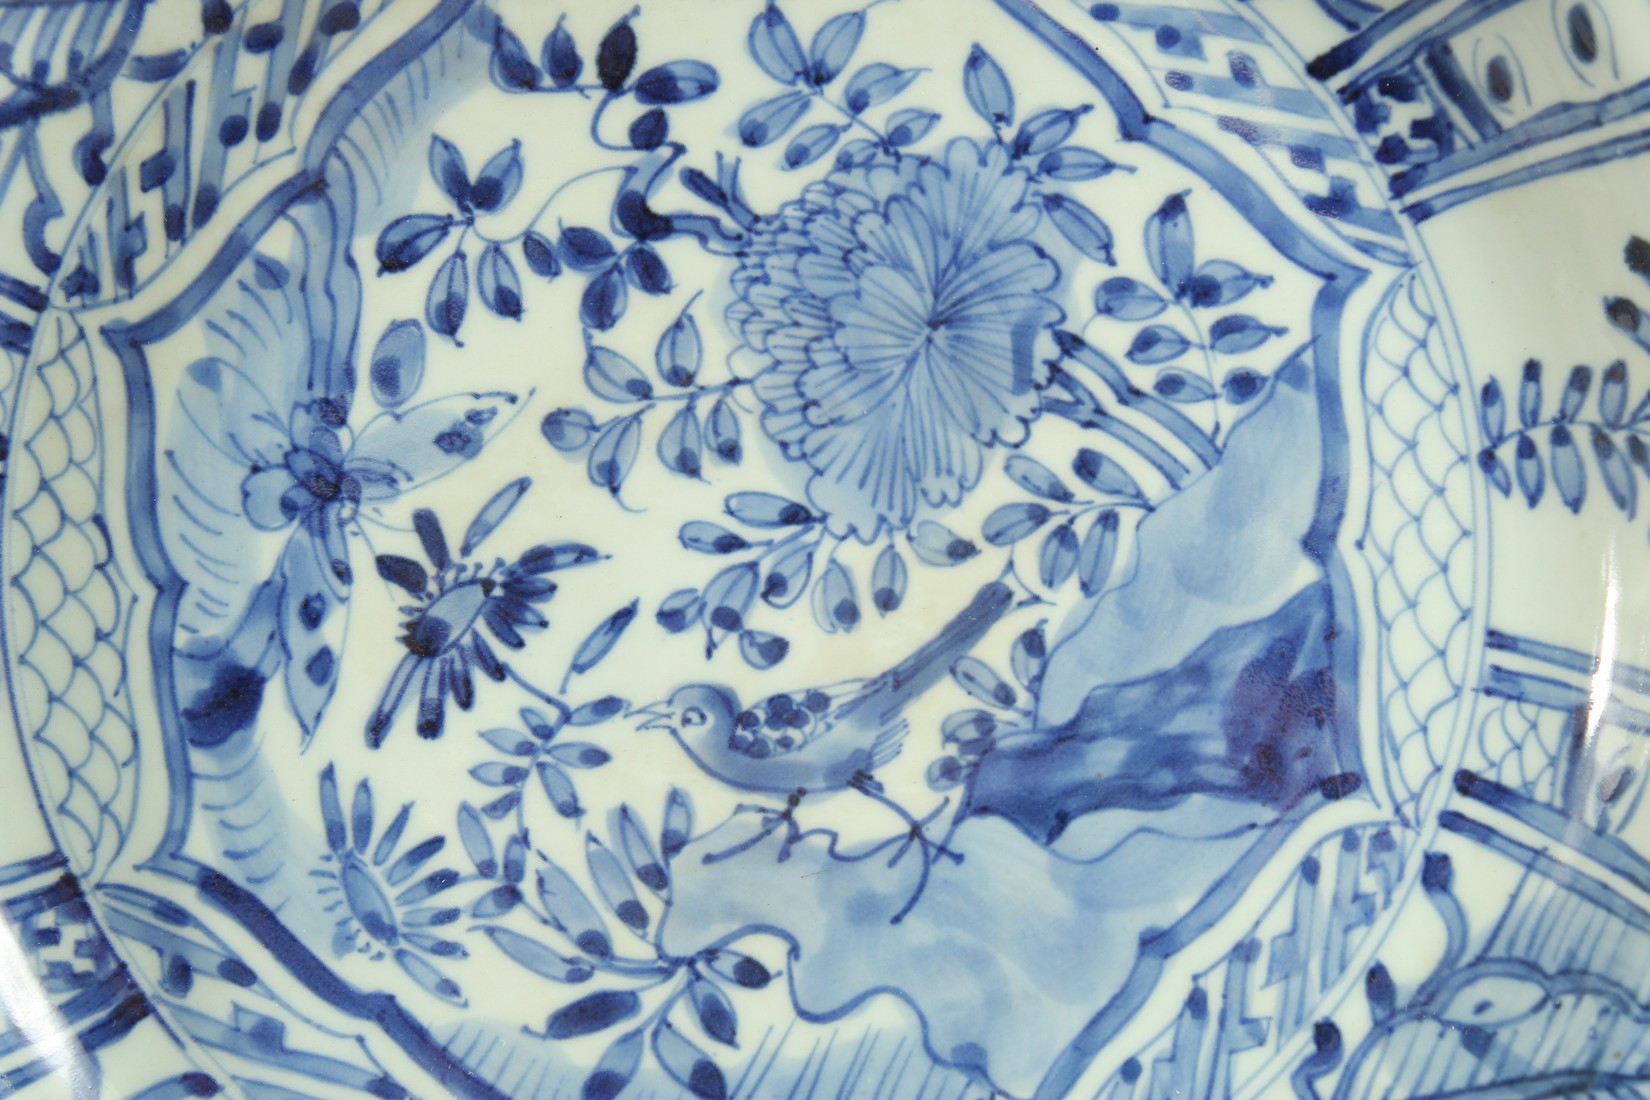 A CHINESE EXPORT BLUE AND WHITE PORCELAIN 'KRAAK' CHARGER, painted with a central panel of a bird - Image 2 of 3